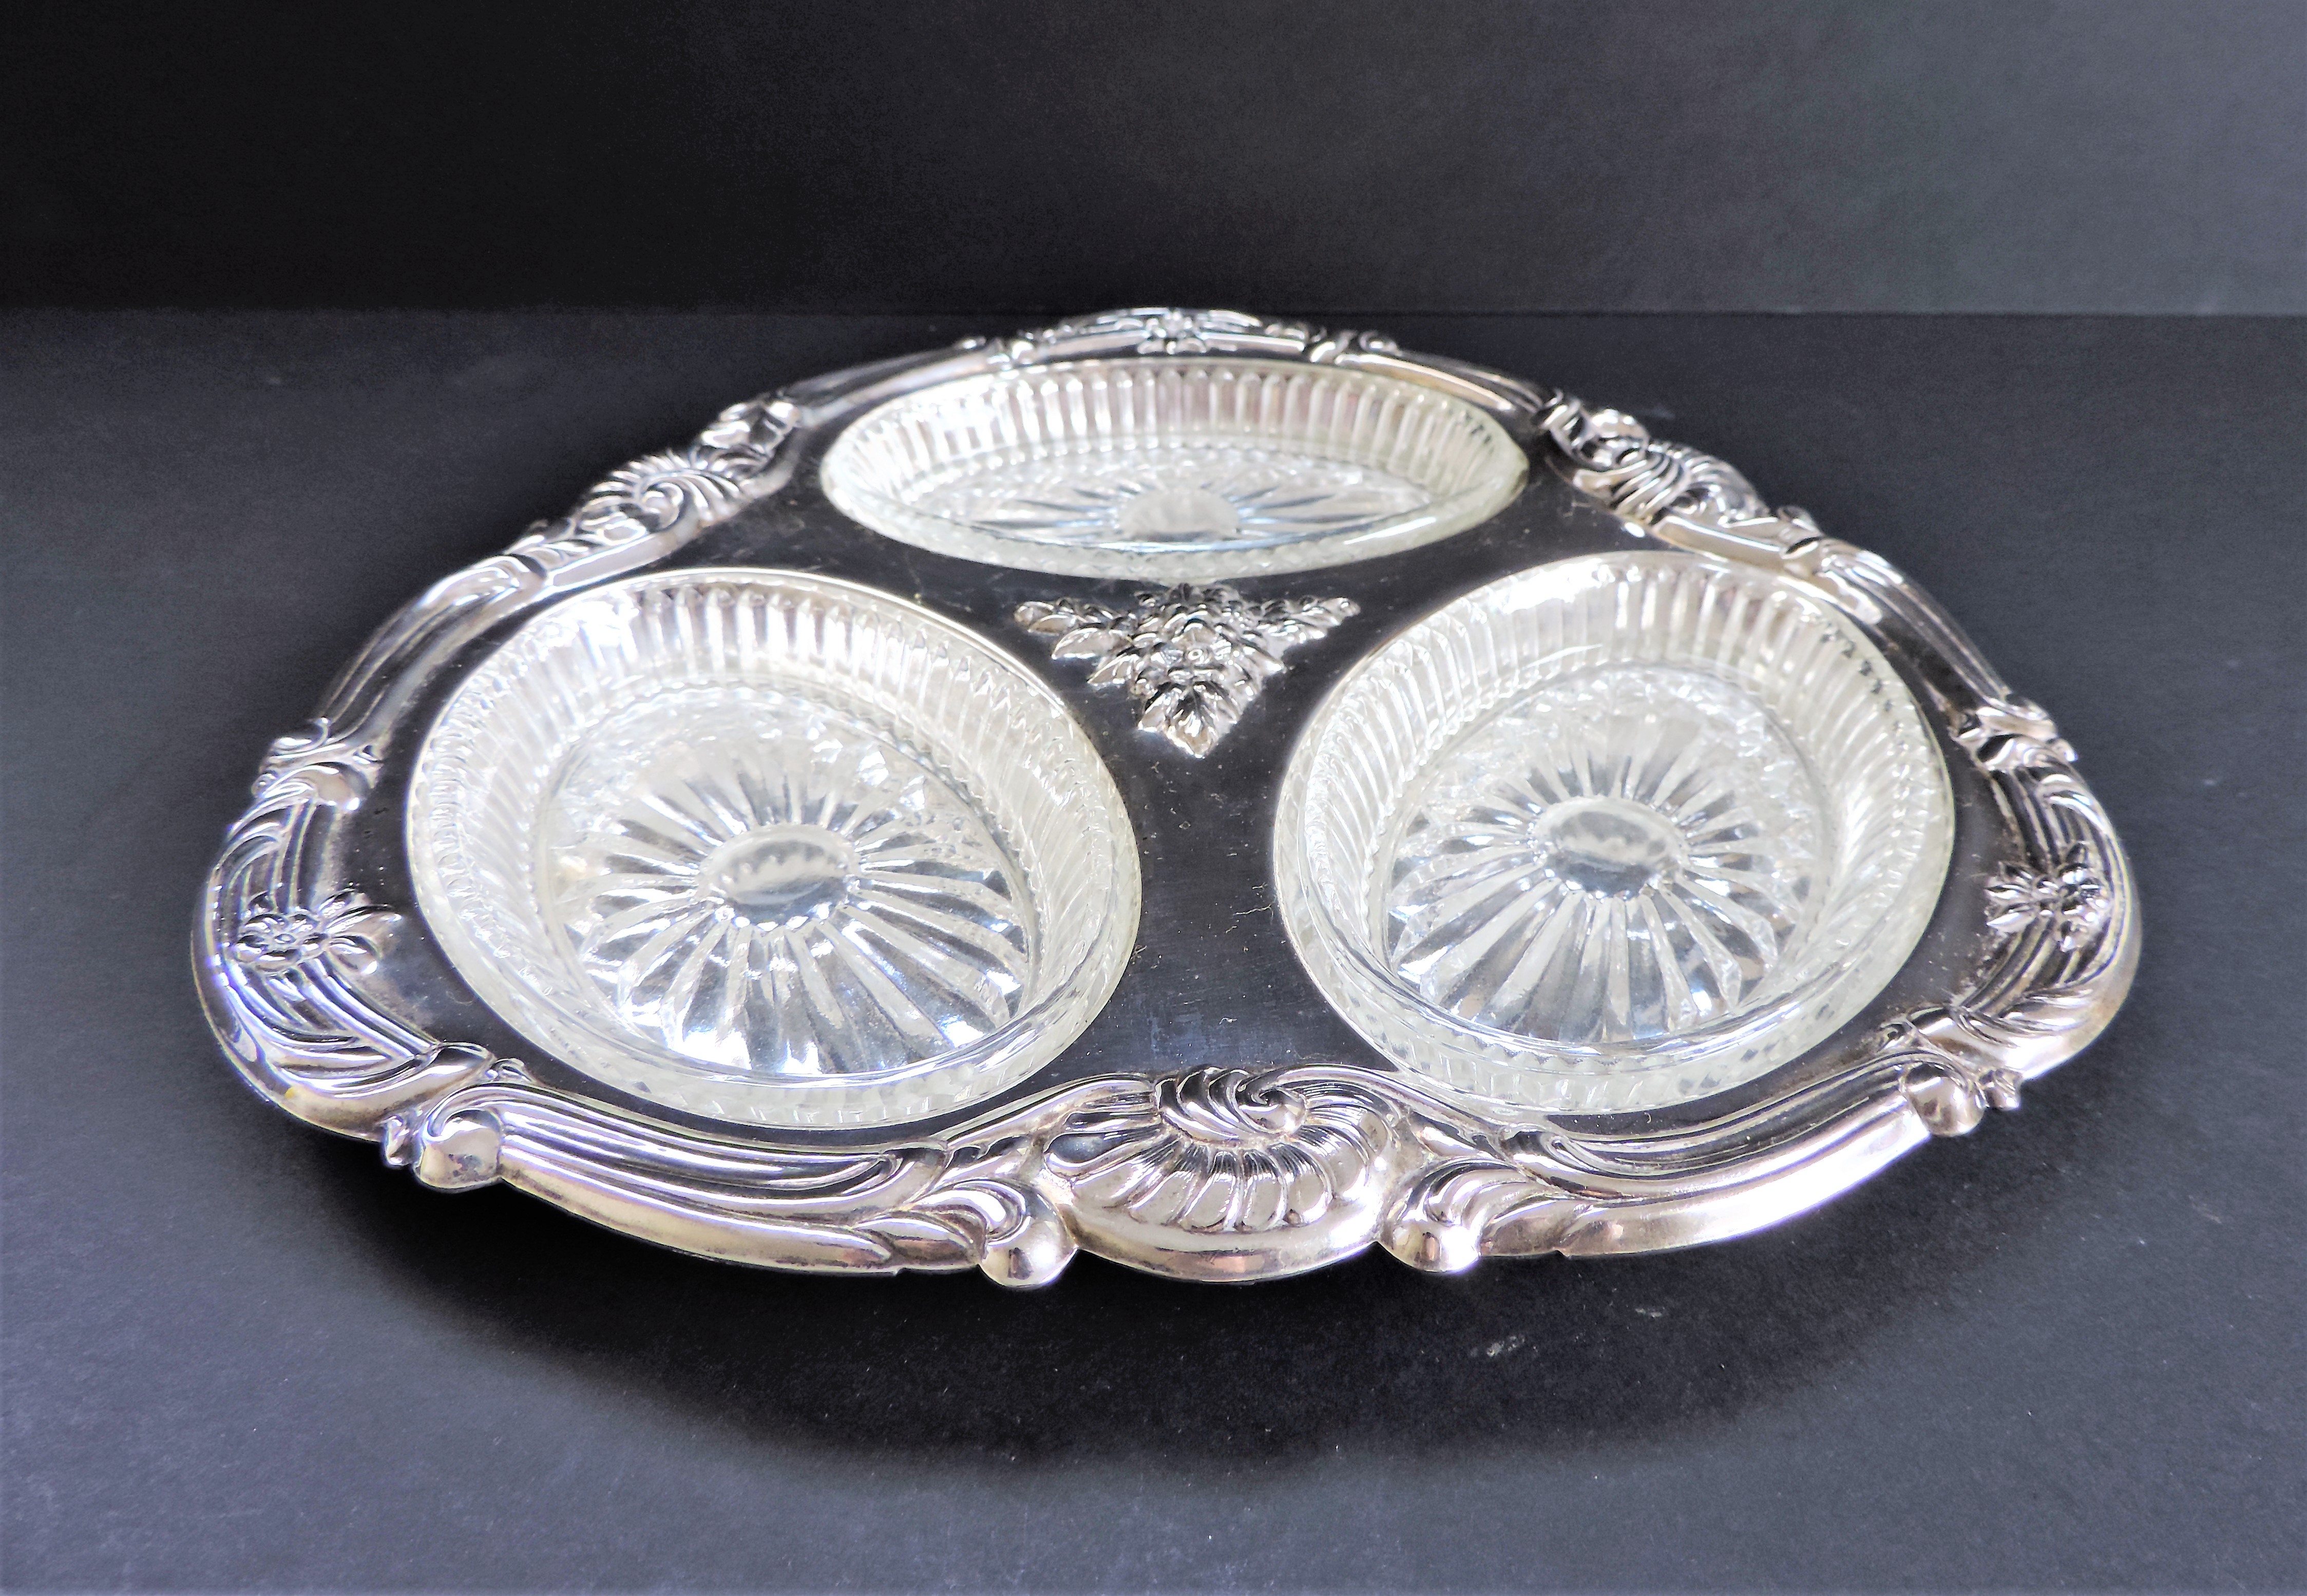 Vintage Silver Plate Hors d'oeuvres Serving Dish